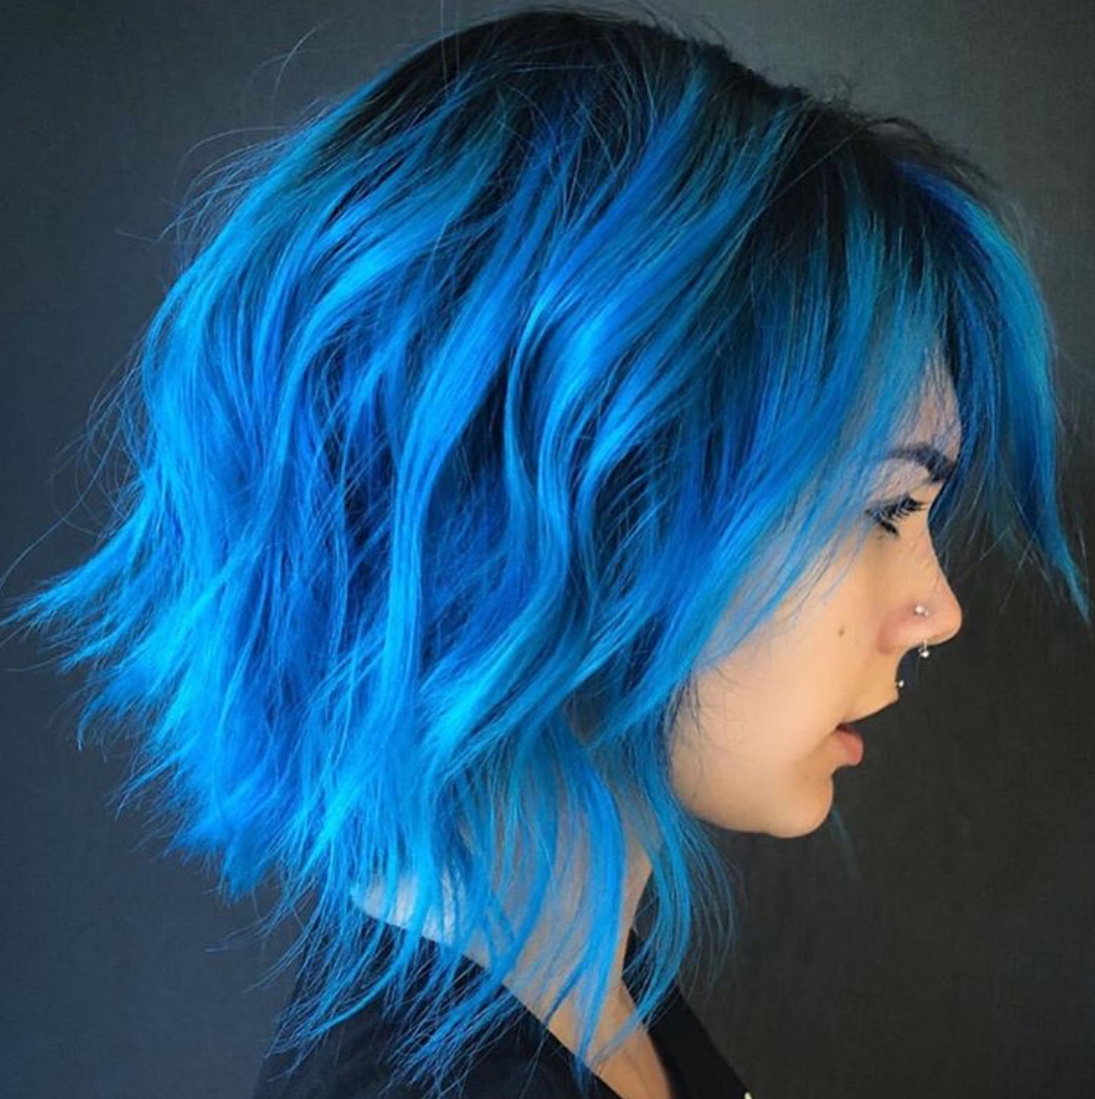 Movie Characters With Blue Hair, Ranked